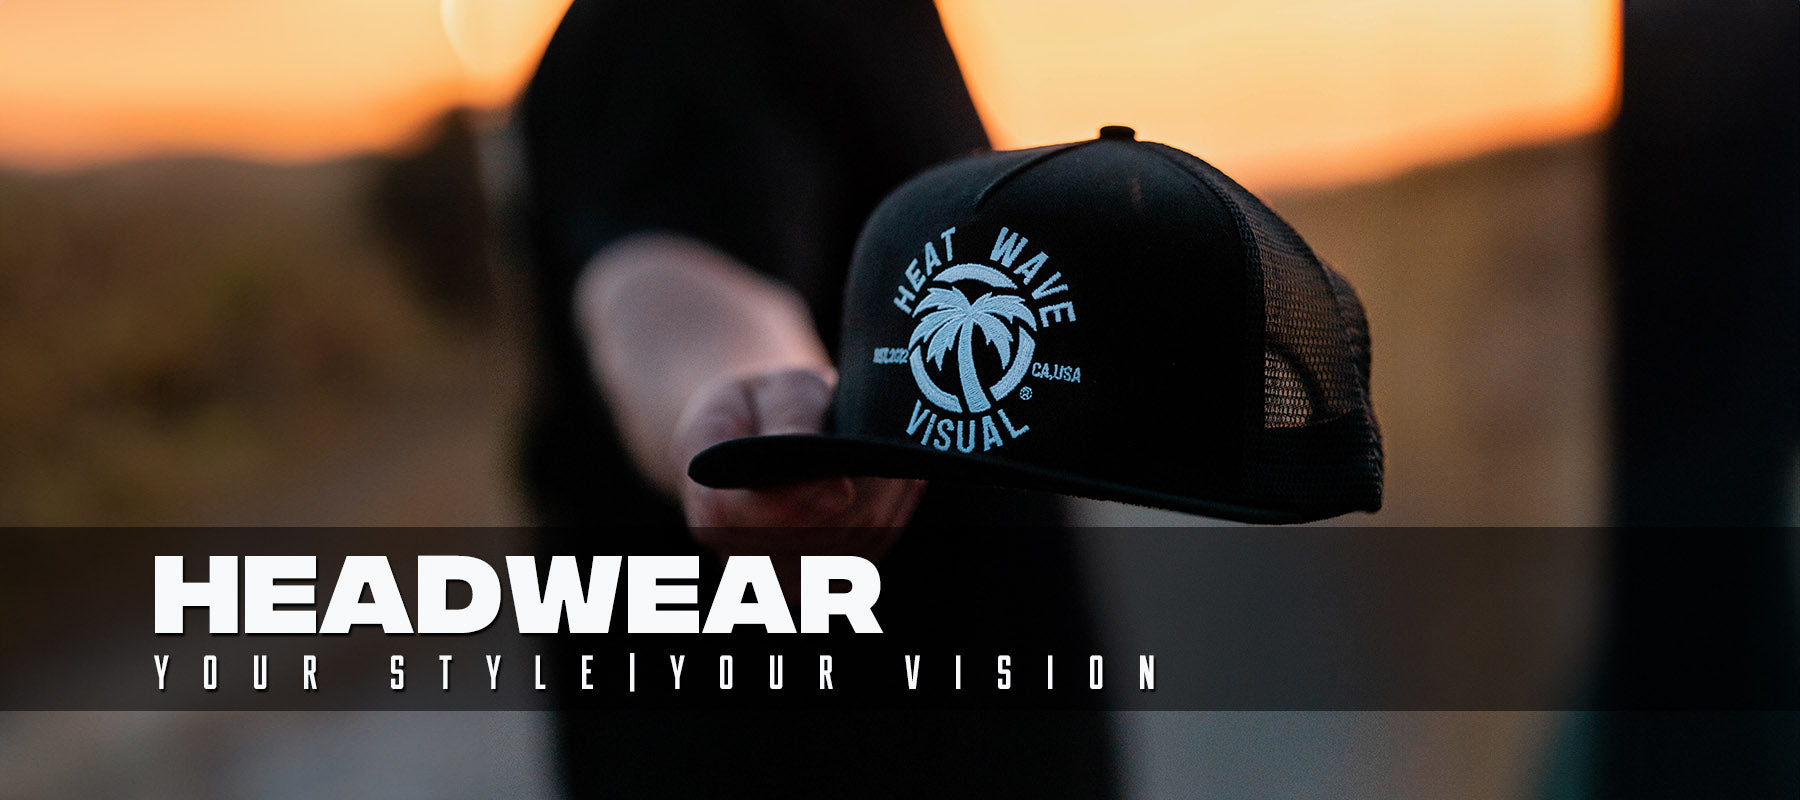 Shop Official Heat Wave Visual Australia. Free Same Day Shipping. Your Style. Your Vision. Shop Online.